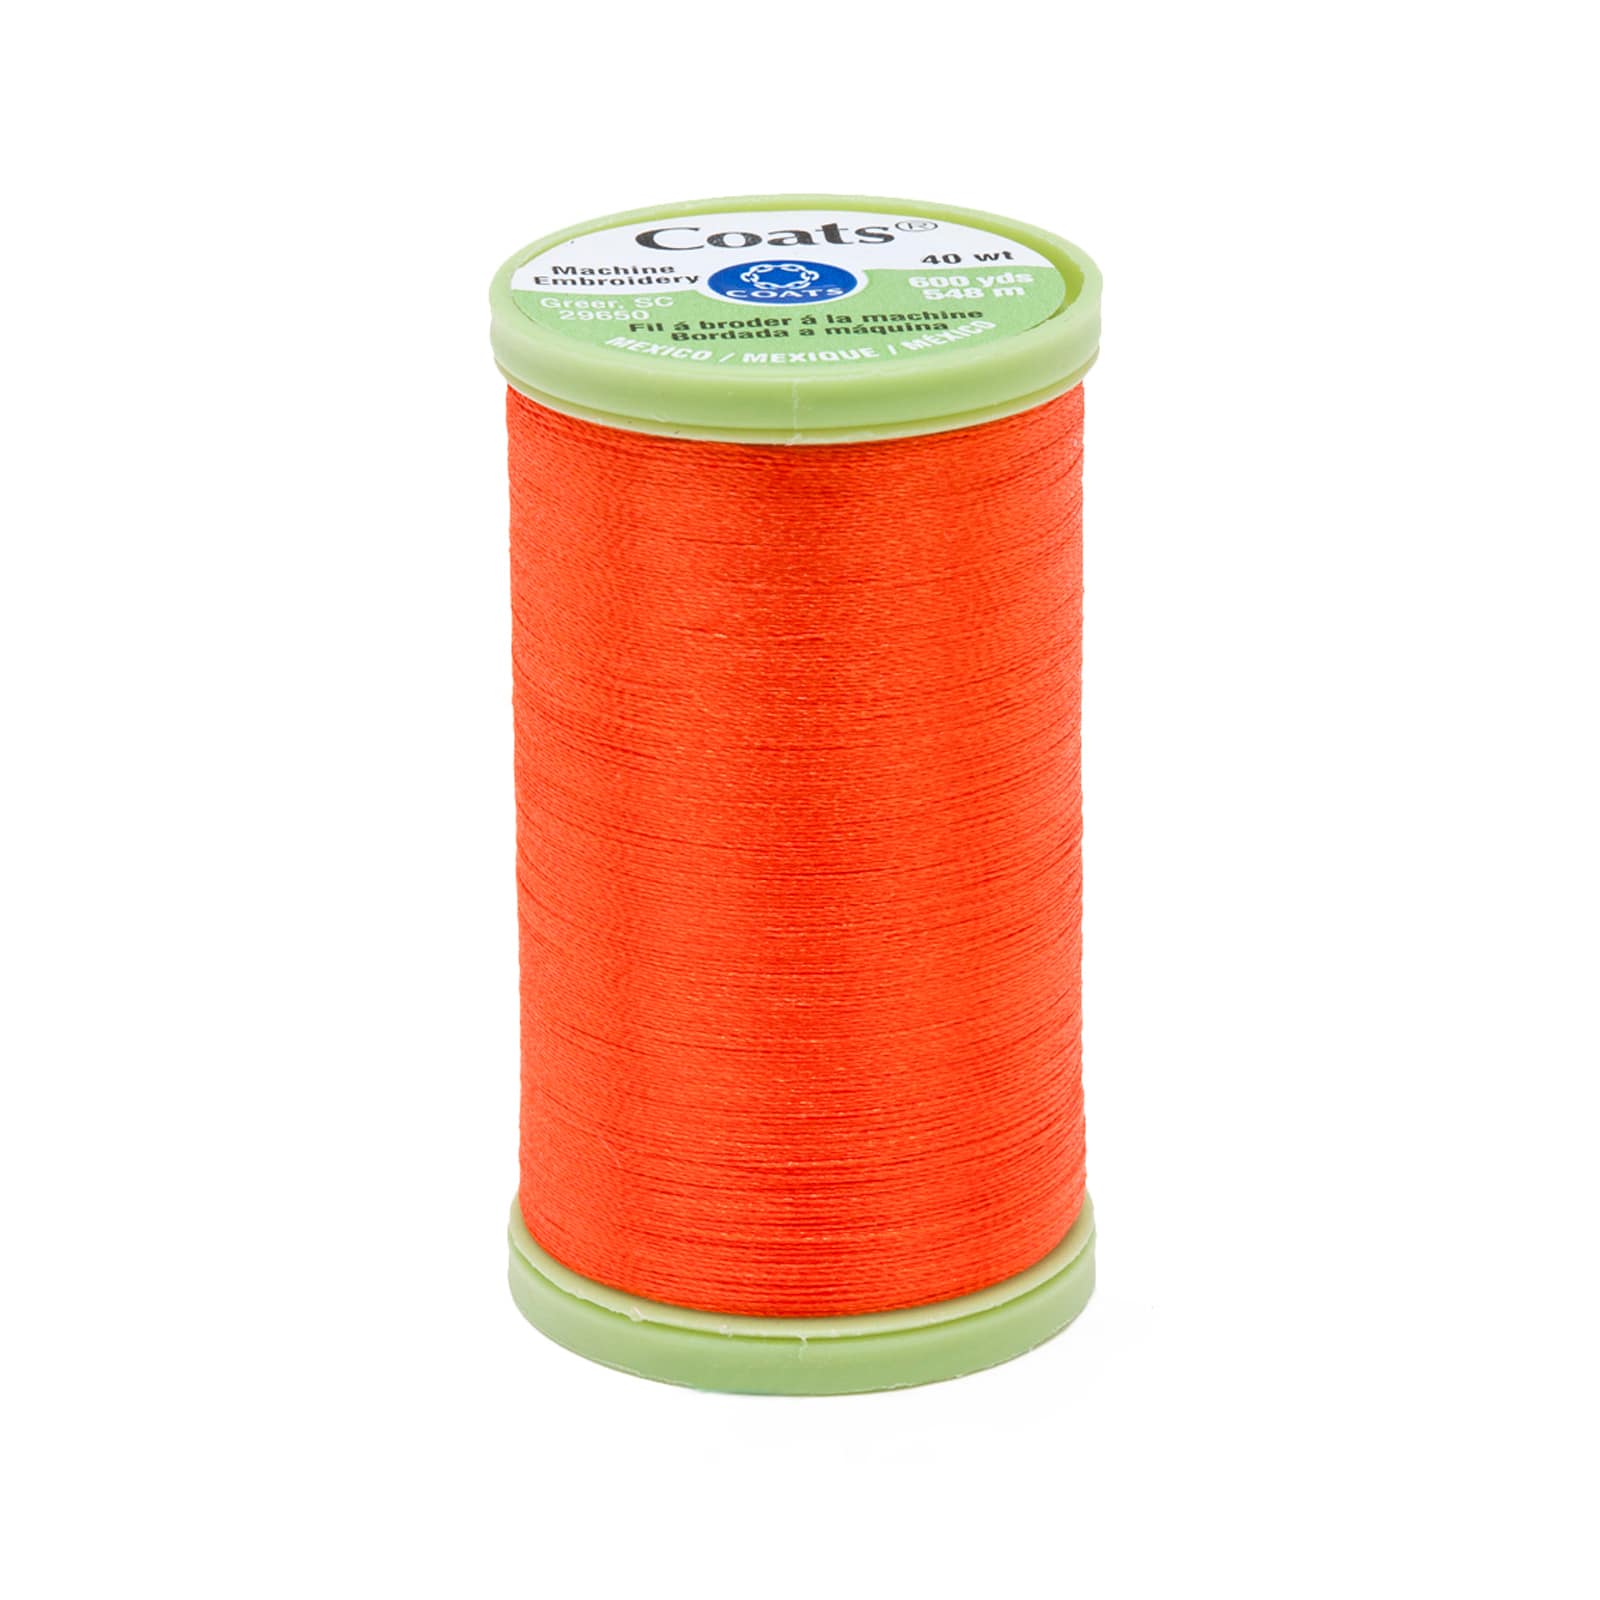 Threads Sewing Embroidery Machine  Embroidery Sewing Machine Yarn